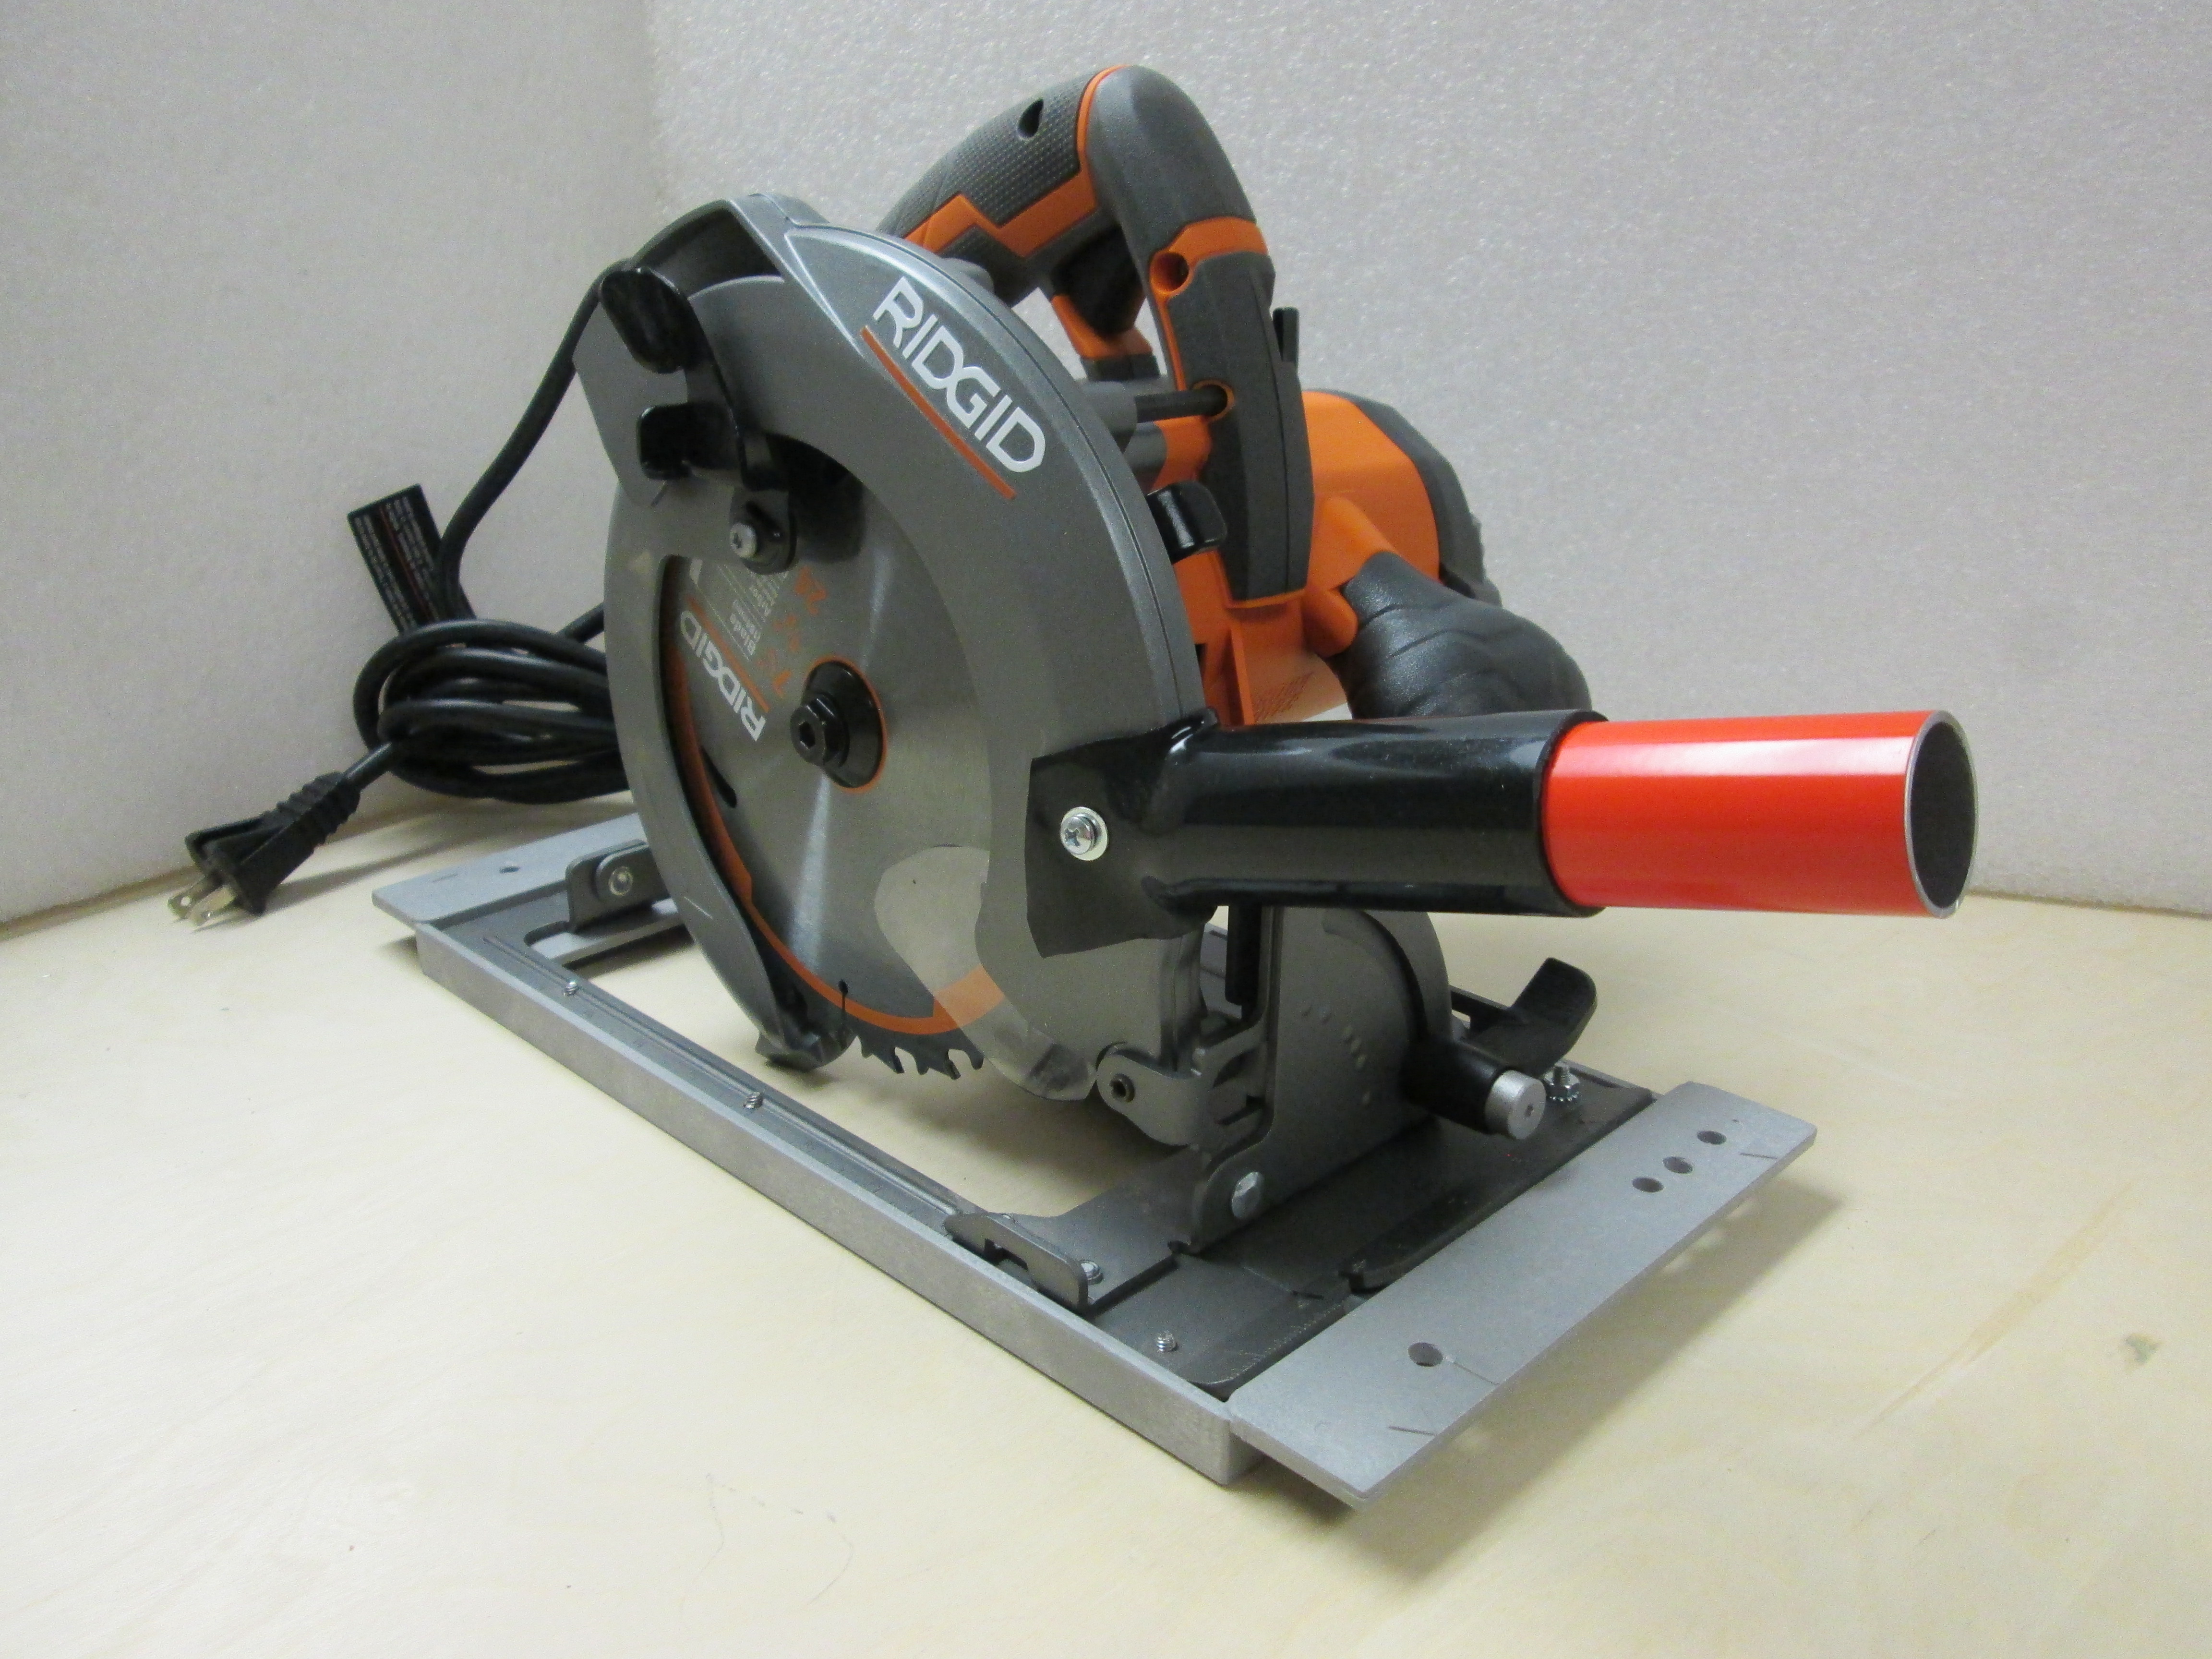  Clamps,Wood clamps,Panel saw, Clamps, Saw, Circular saw, Track saw